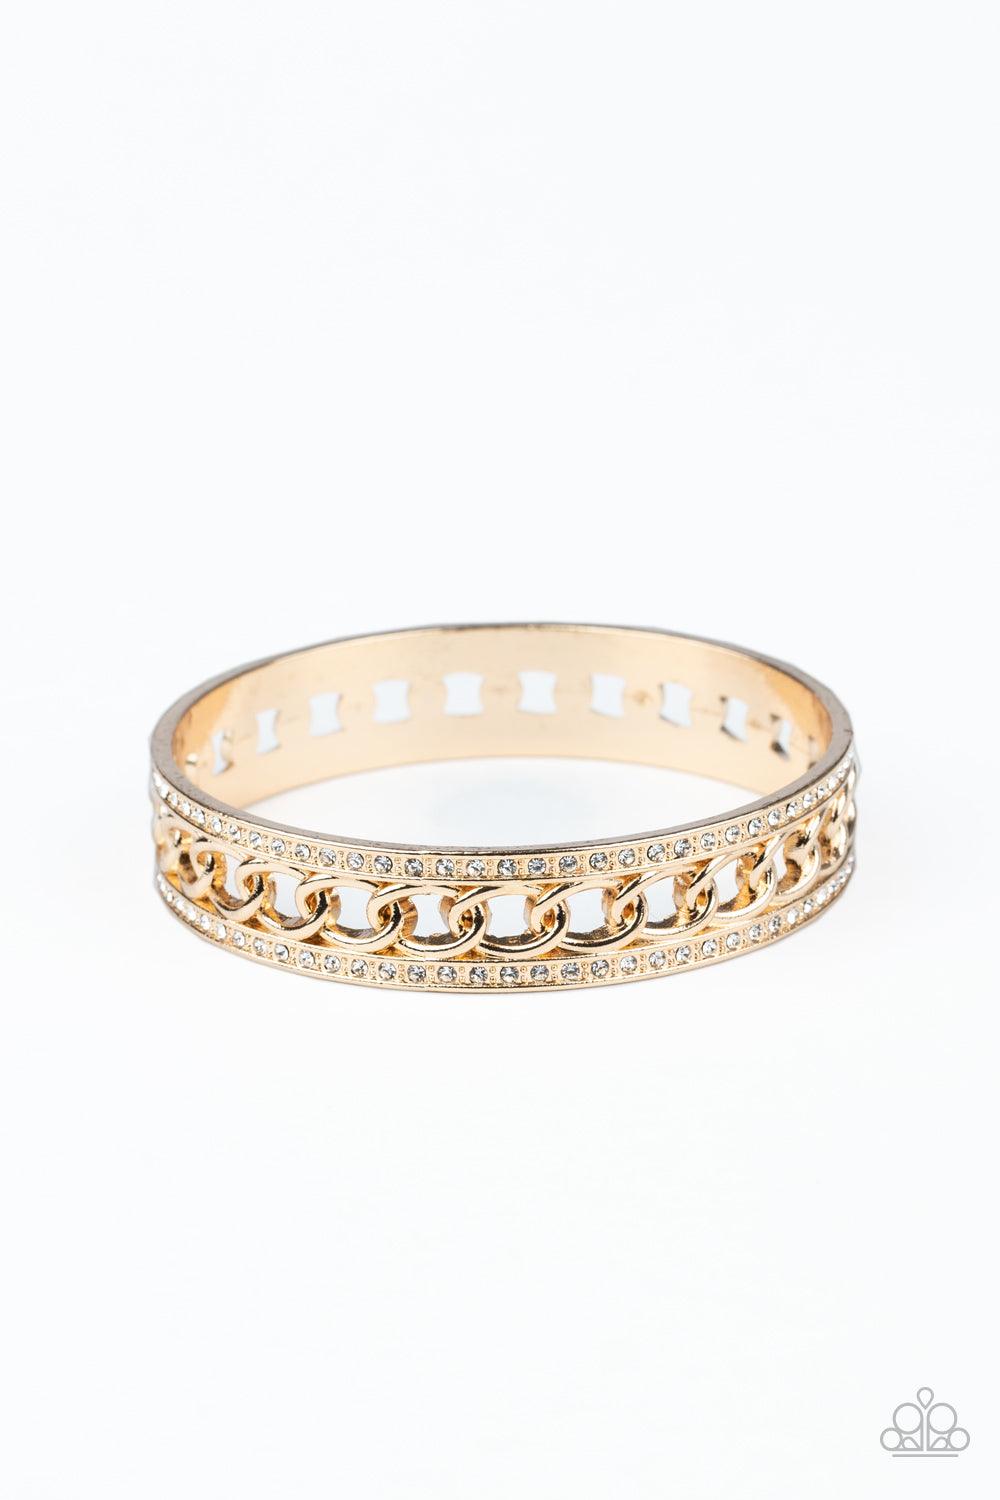 Paparazzi Accessories Couture Court - Gold Bordered in rows of blinding white rhinestones, a glistening strand of gold chain glamorously links around the wrist, coalescing into an unapologetically glittery bangle. Sold as one individual bracelet. Jewelry